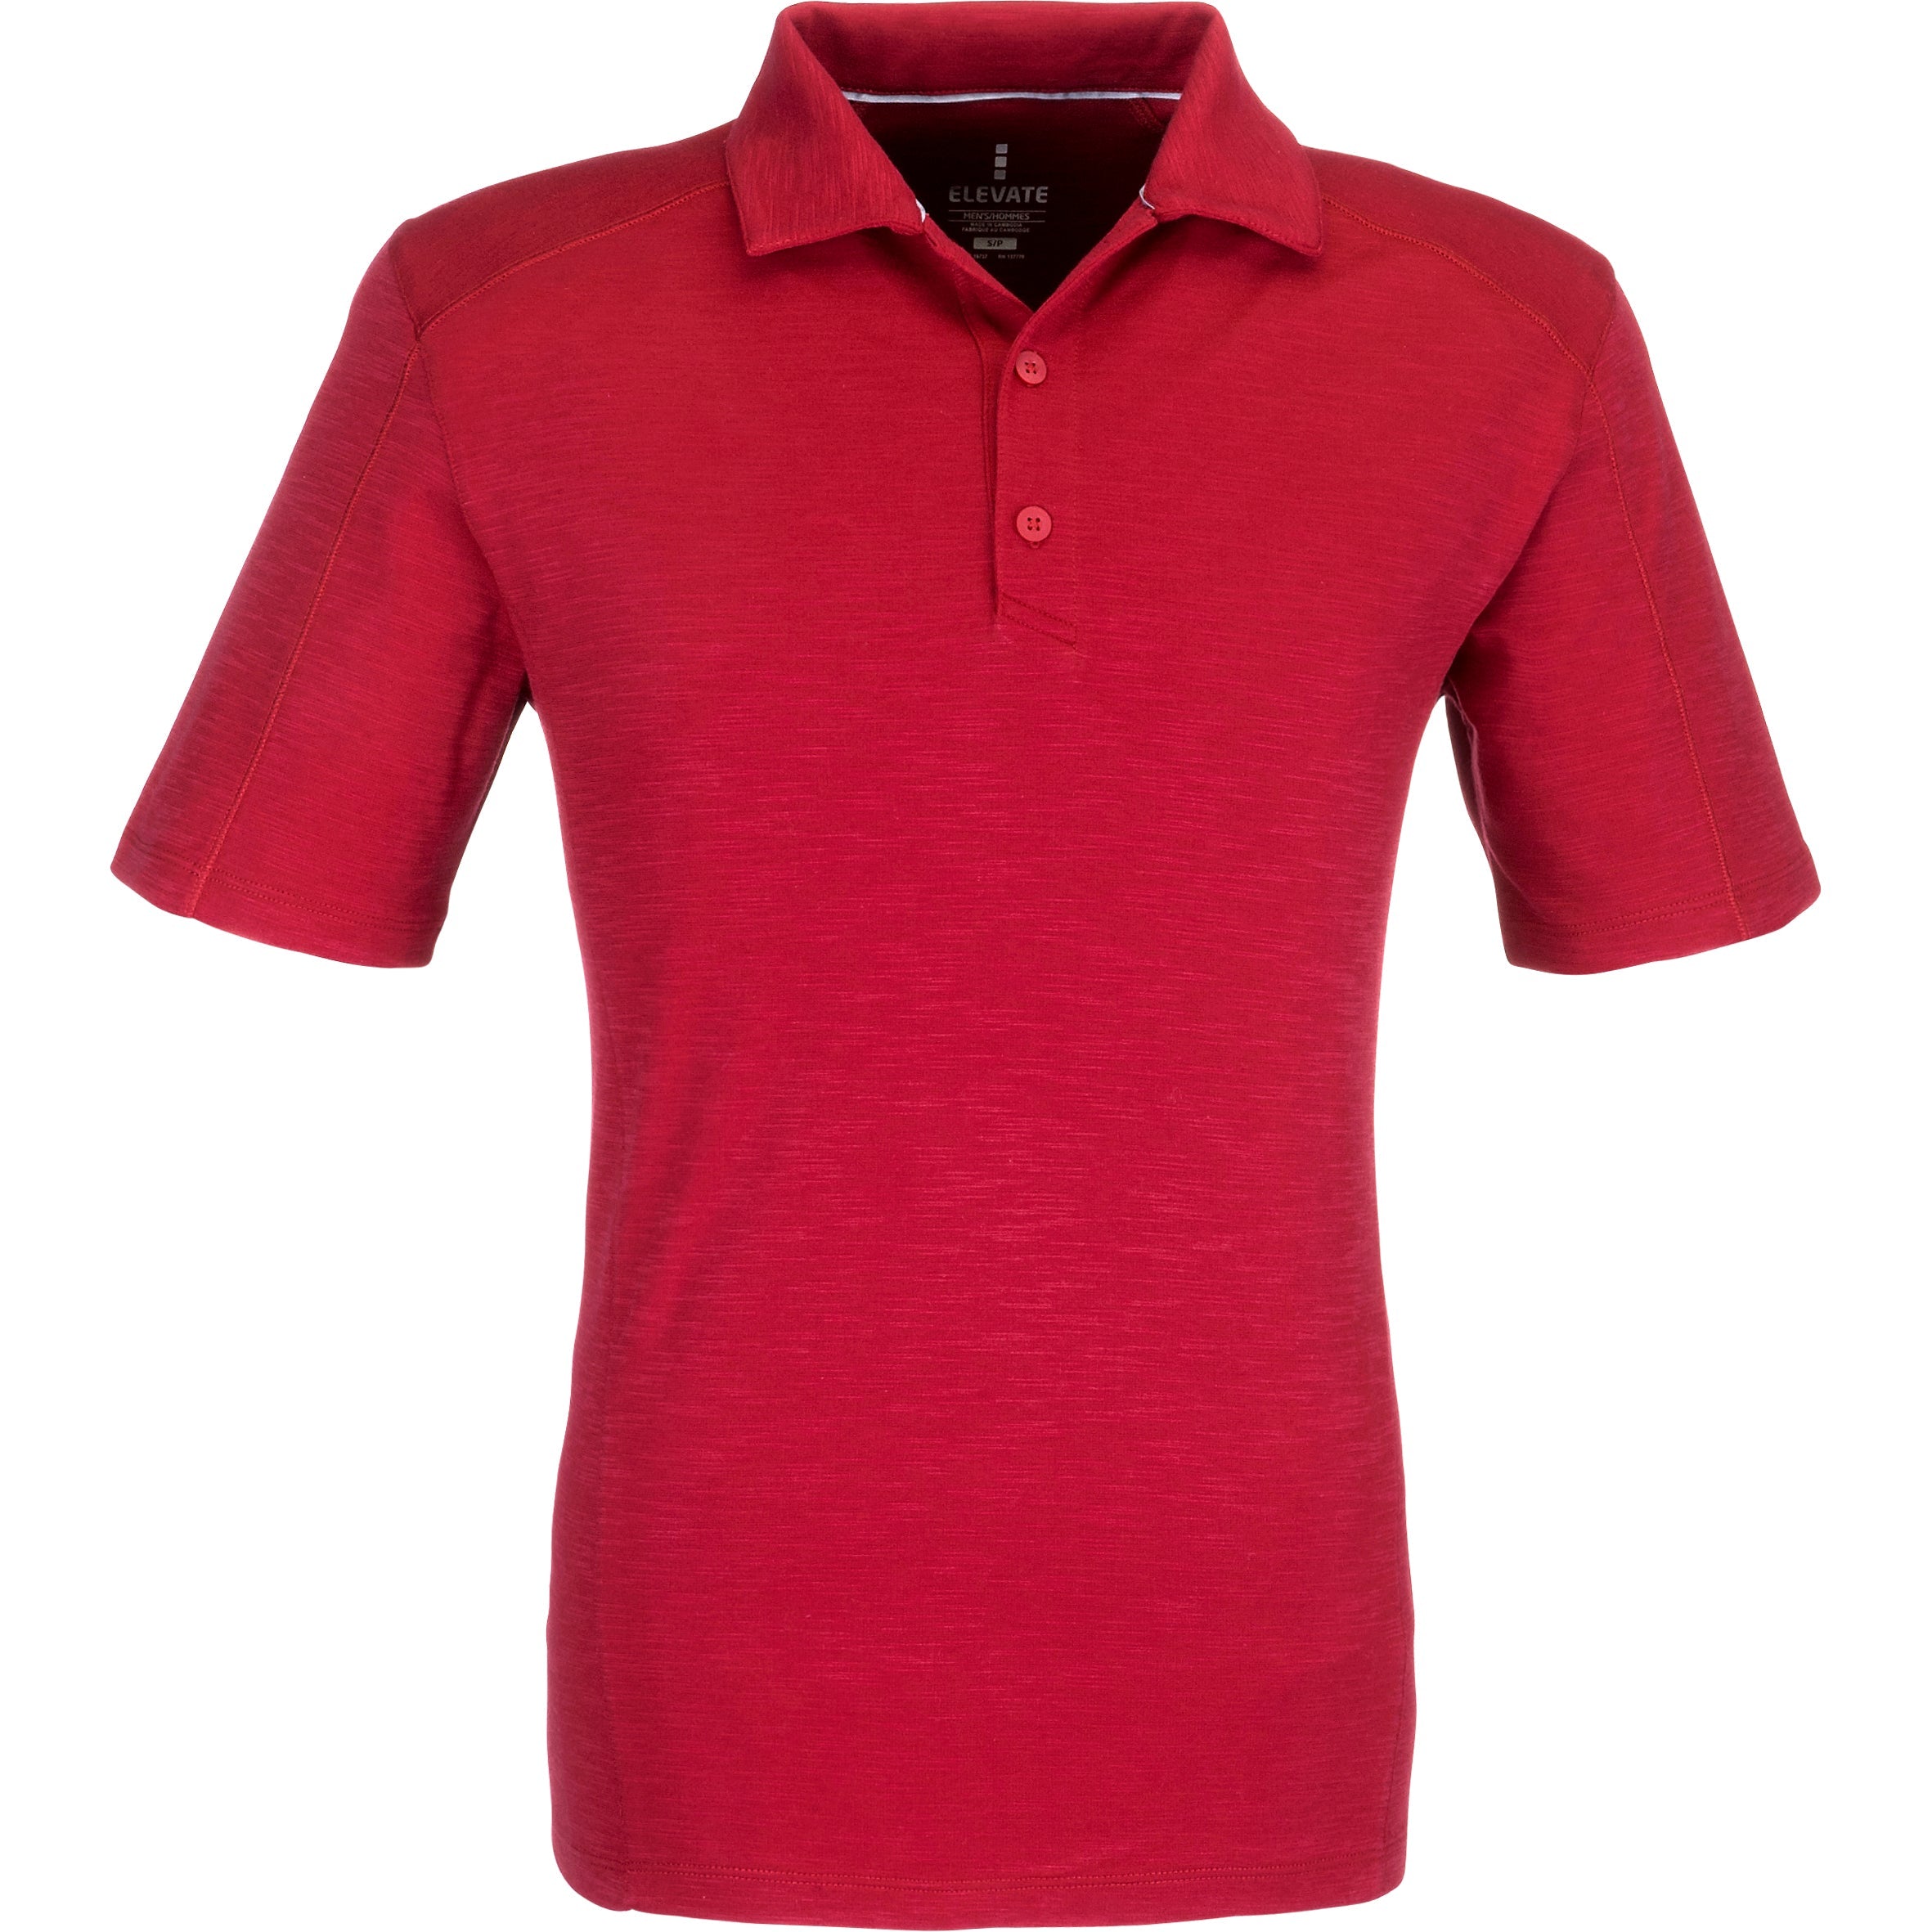 Mens Jepson Golf Shirt - Grey Only-L-Red-R